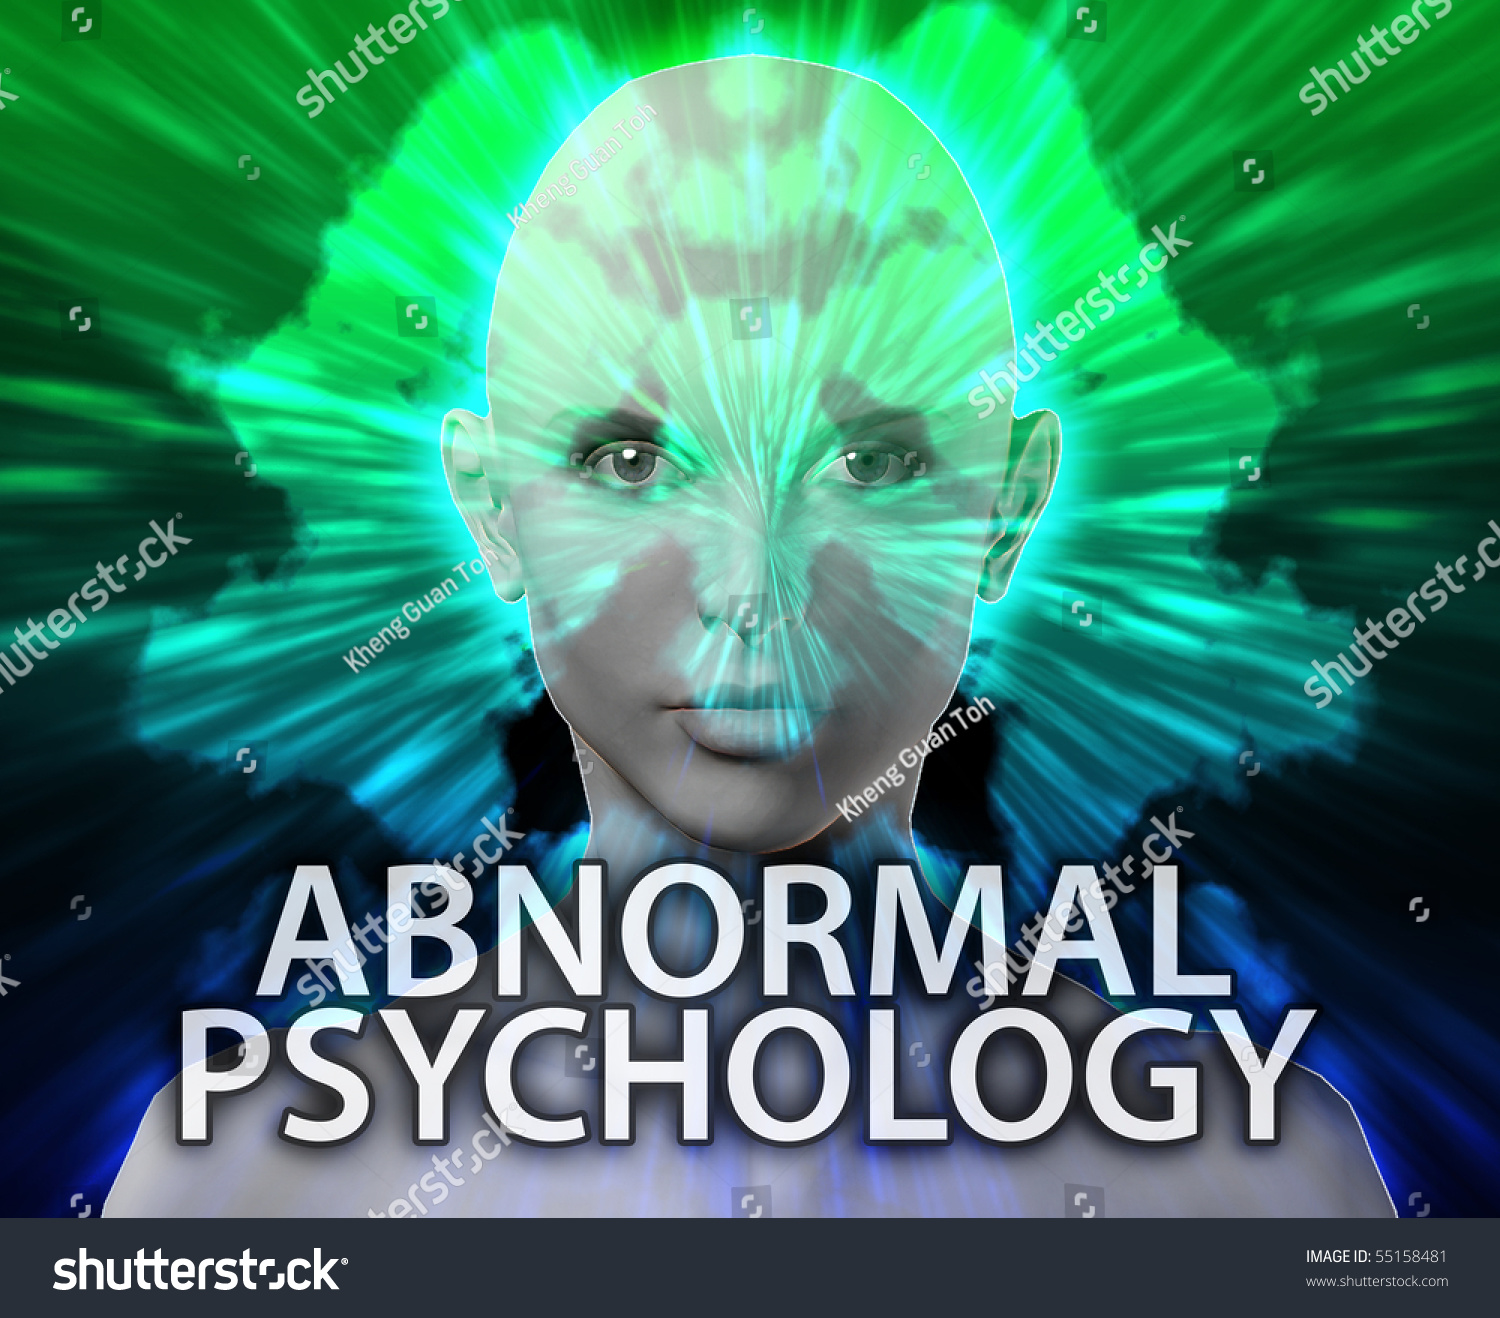 300 psy abnormal psychology therapies